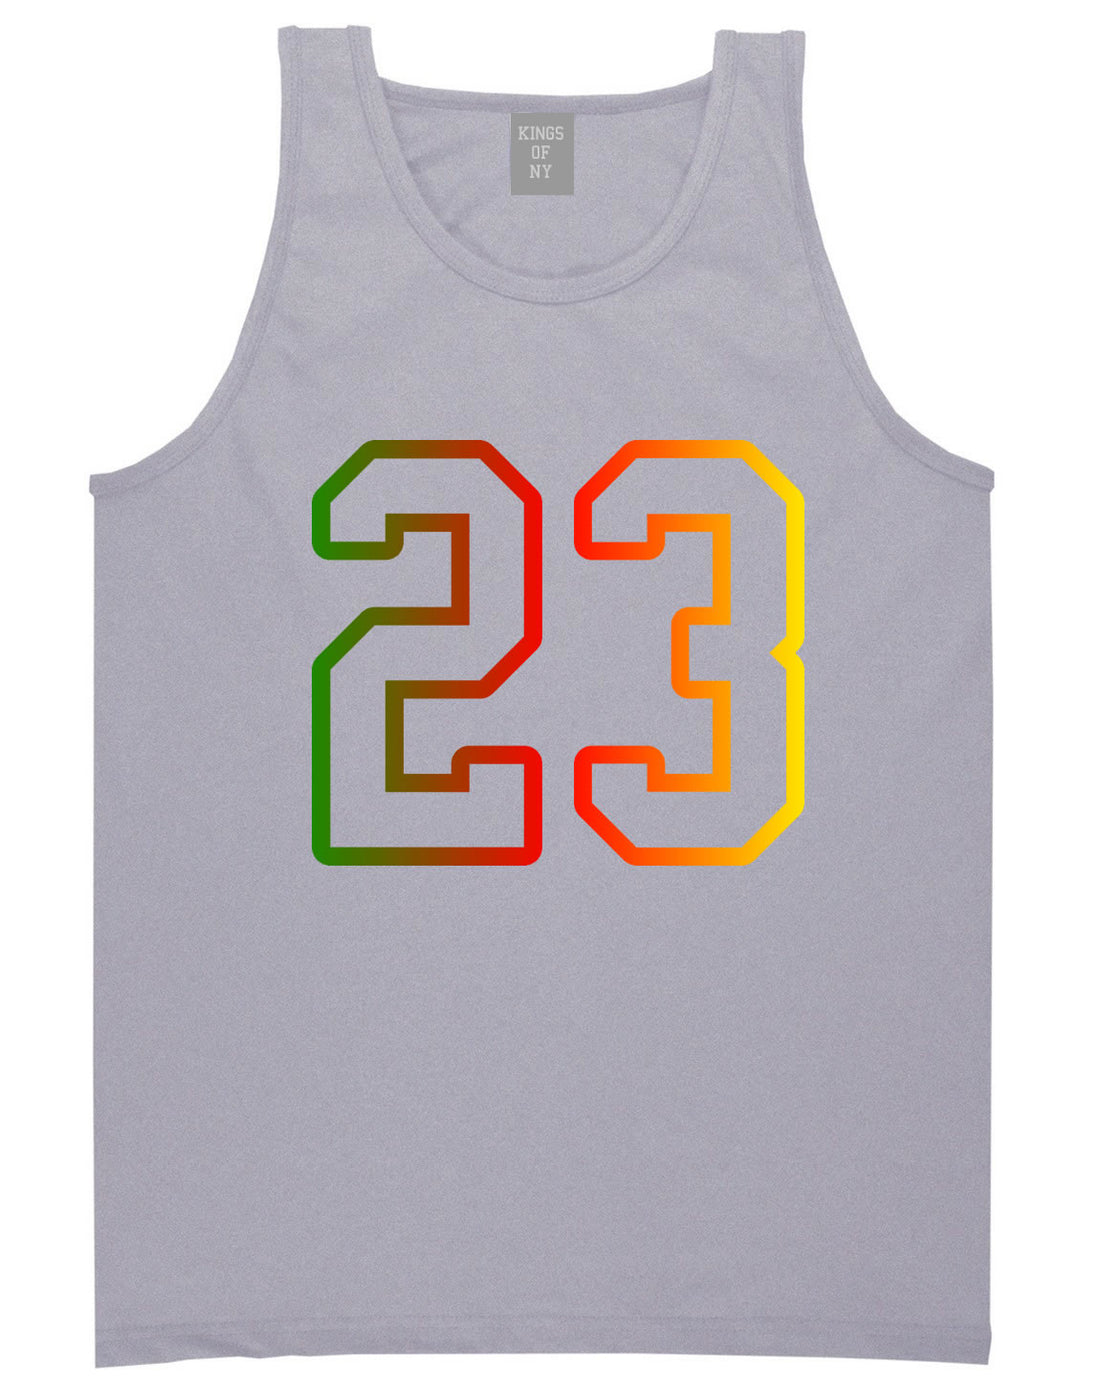 23 Cement Print Colorful Jersey Tank Top in Grey By Kings Of NY